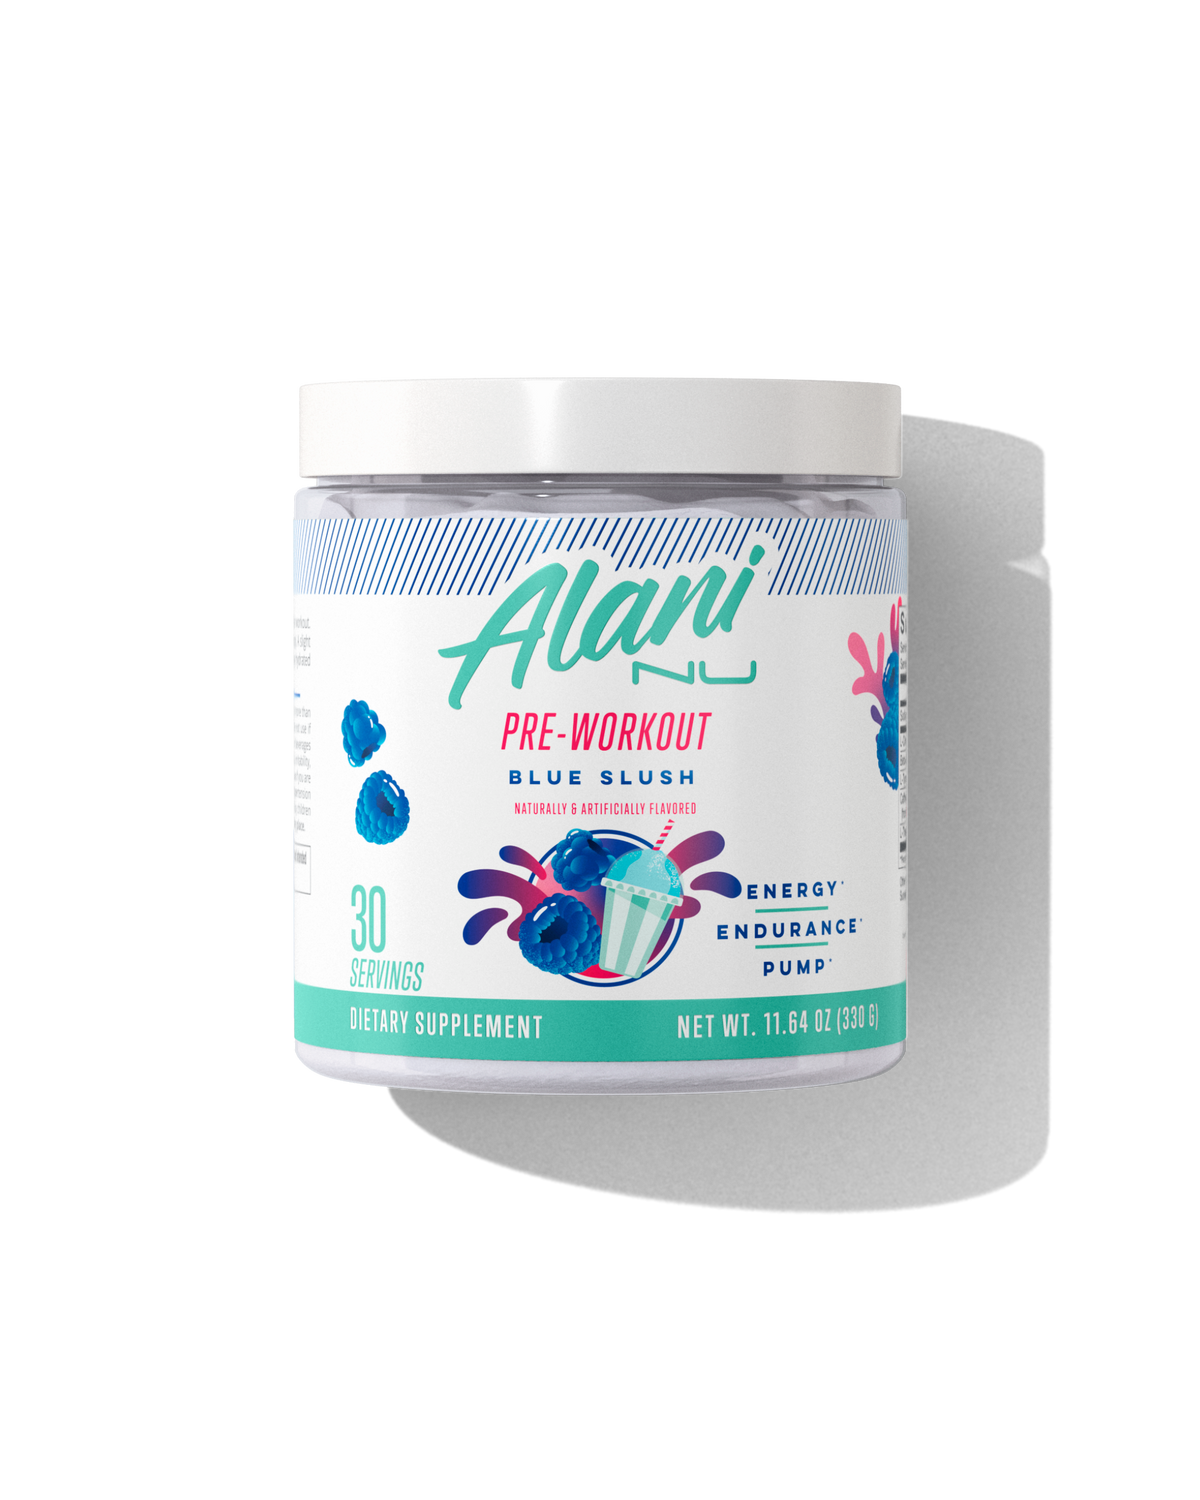 Alani Nu Rainbow Candy Pre-Workout 30 Servings